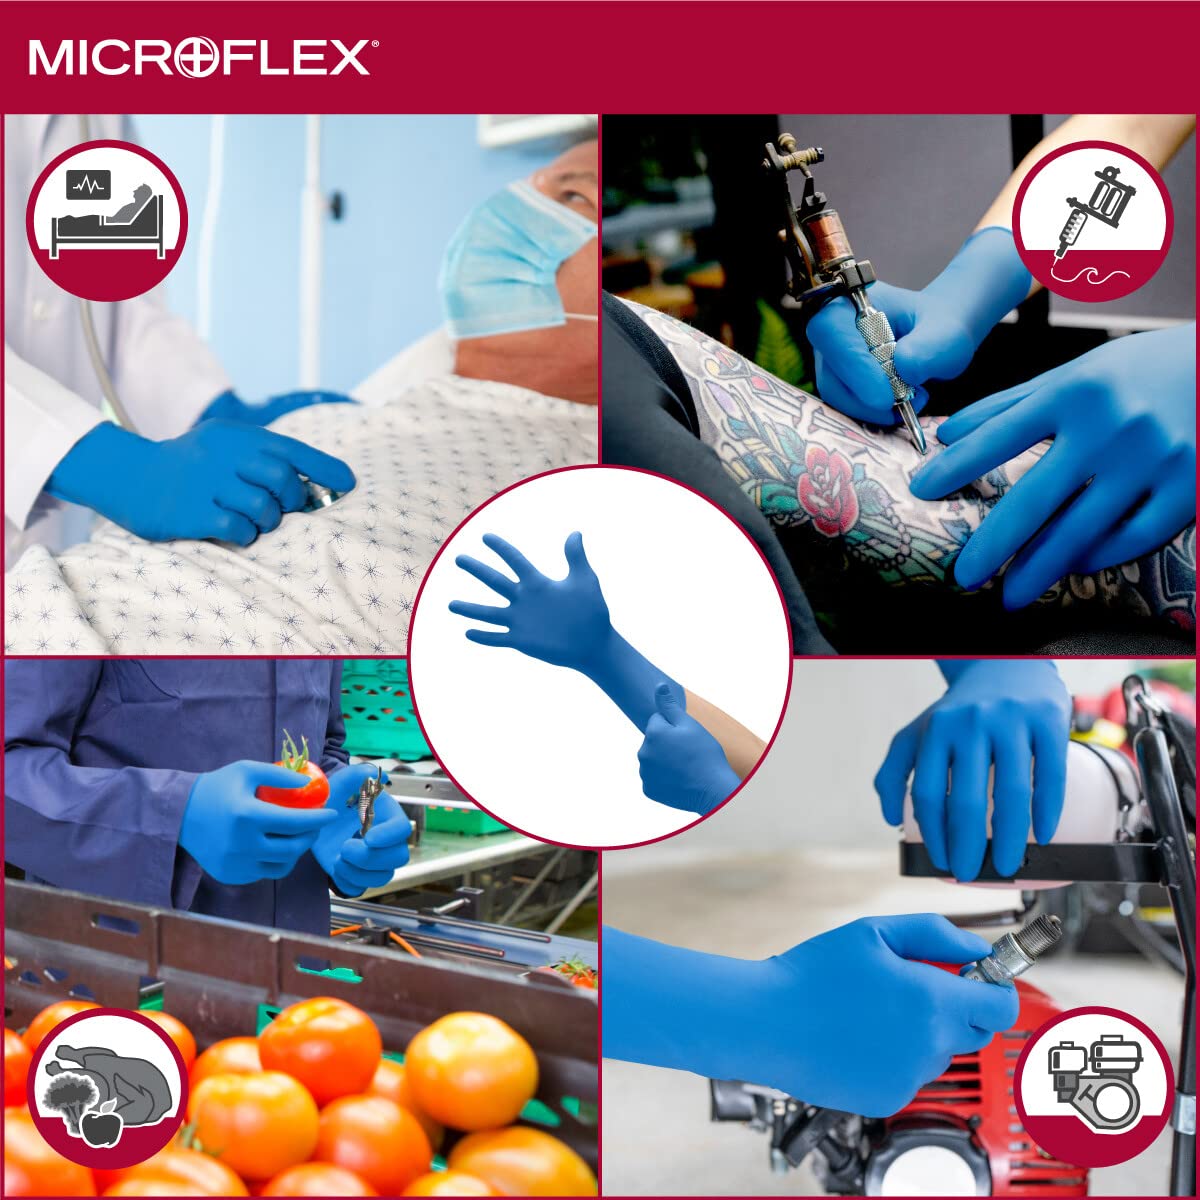 Microflex SafeGrip SG-375 Extra Thick Disposable Latex Gloves for Life Sciences, Automotive w/Textured Fingertips - Blue